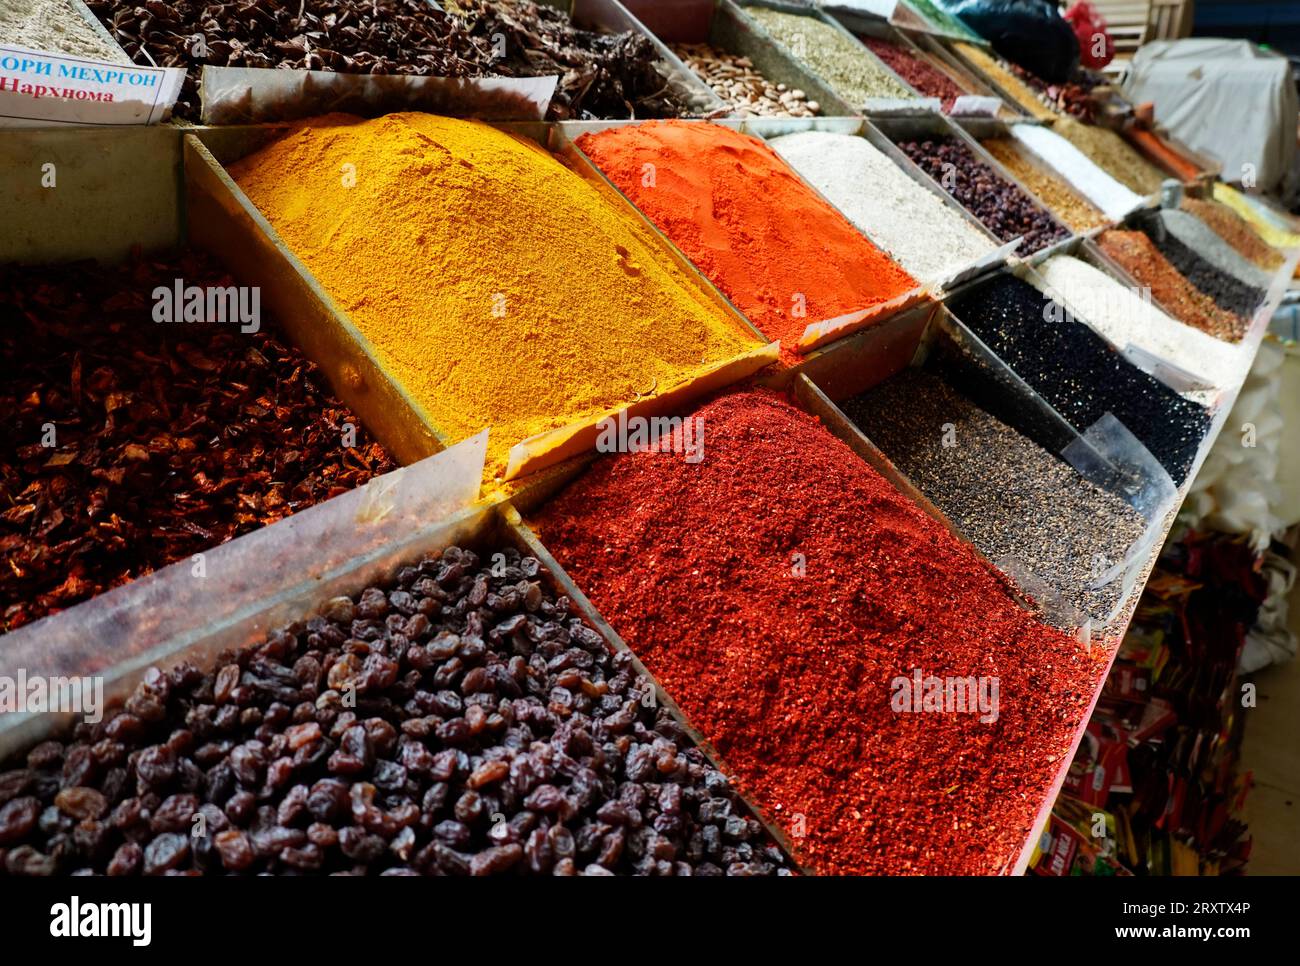 Spices for sale, Central Market, Dushanbe, Tajikistan, Central Asia, Asia Stock Photo